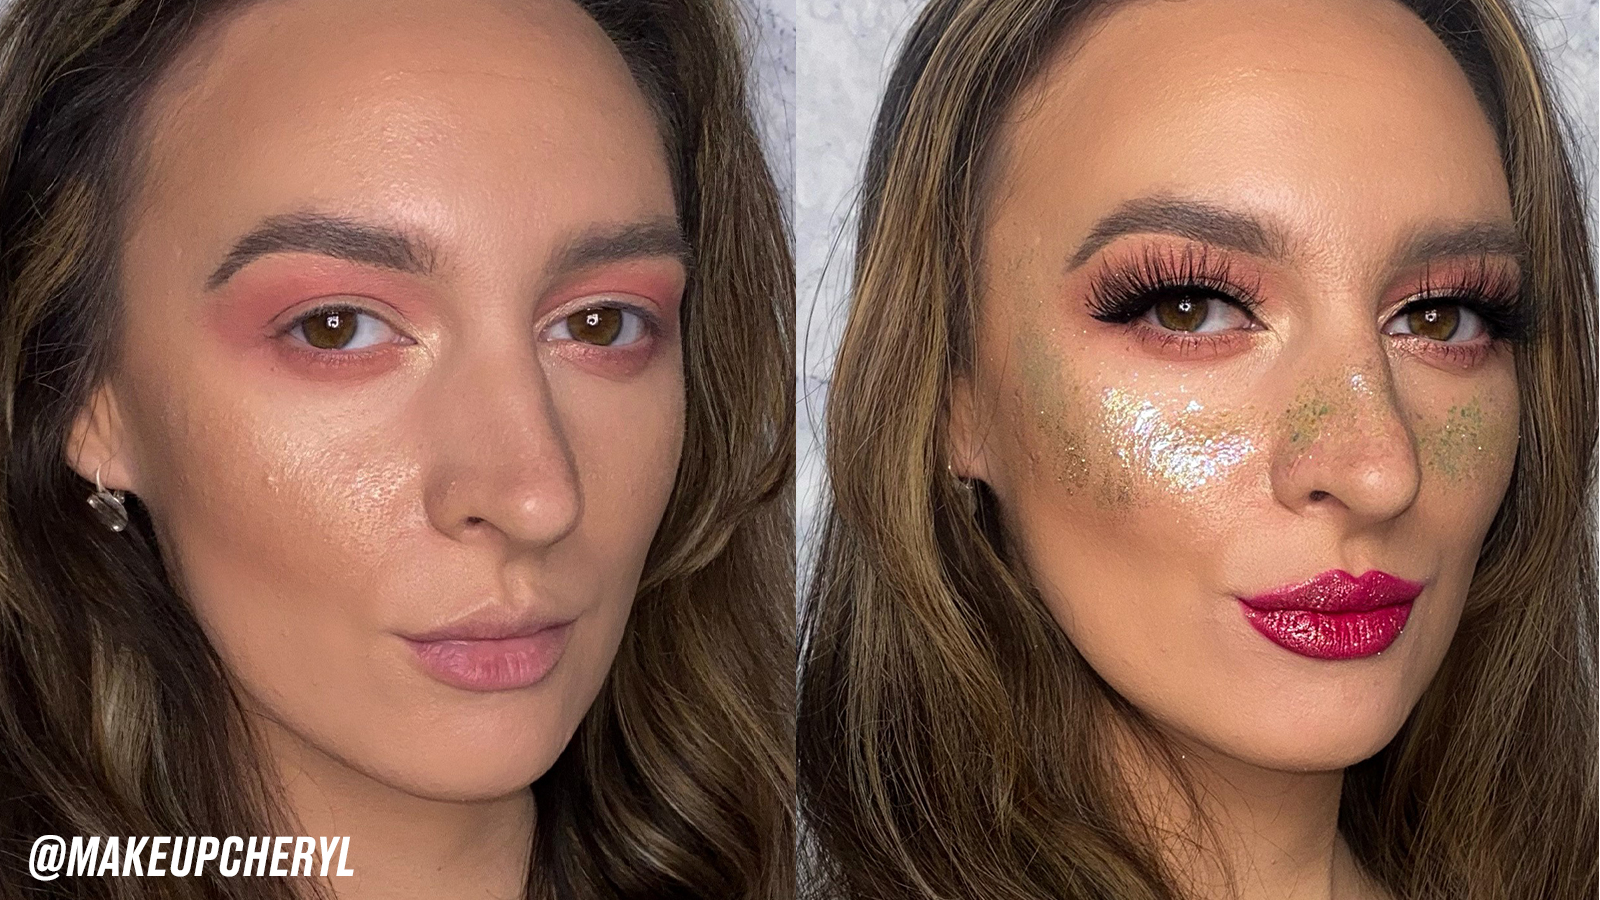 How To Apply Glitter To Face - Beauty